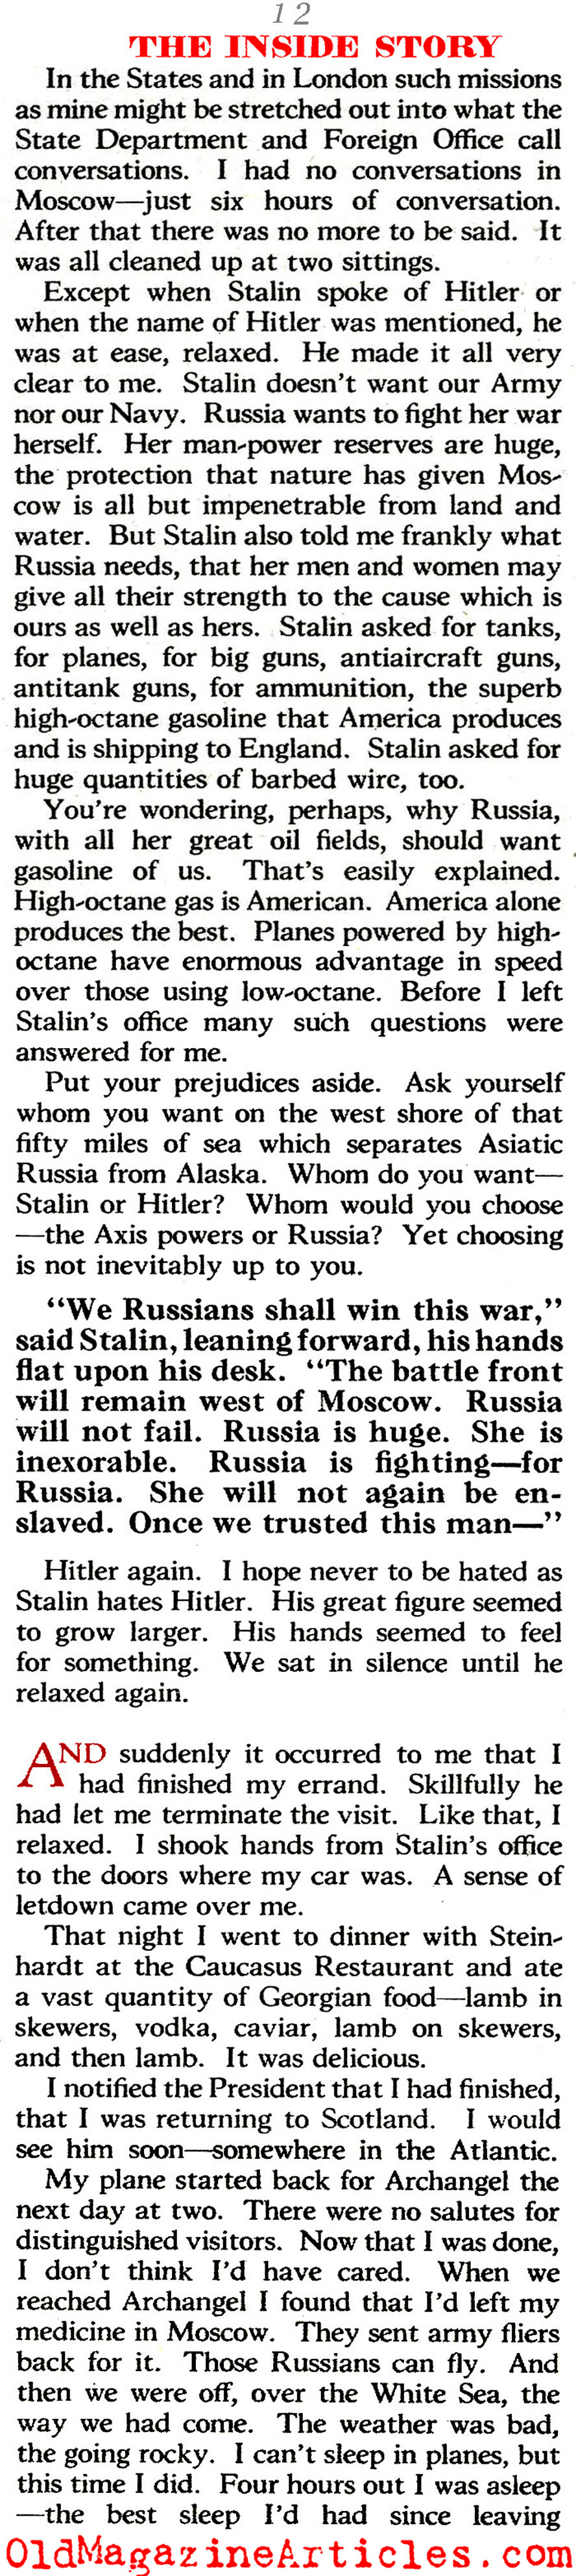 Harry Hopkins and Stalin (The American Magazine, 1941)